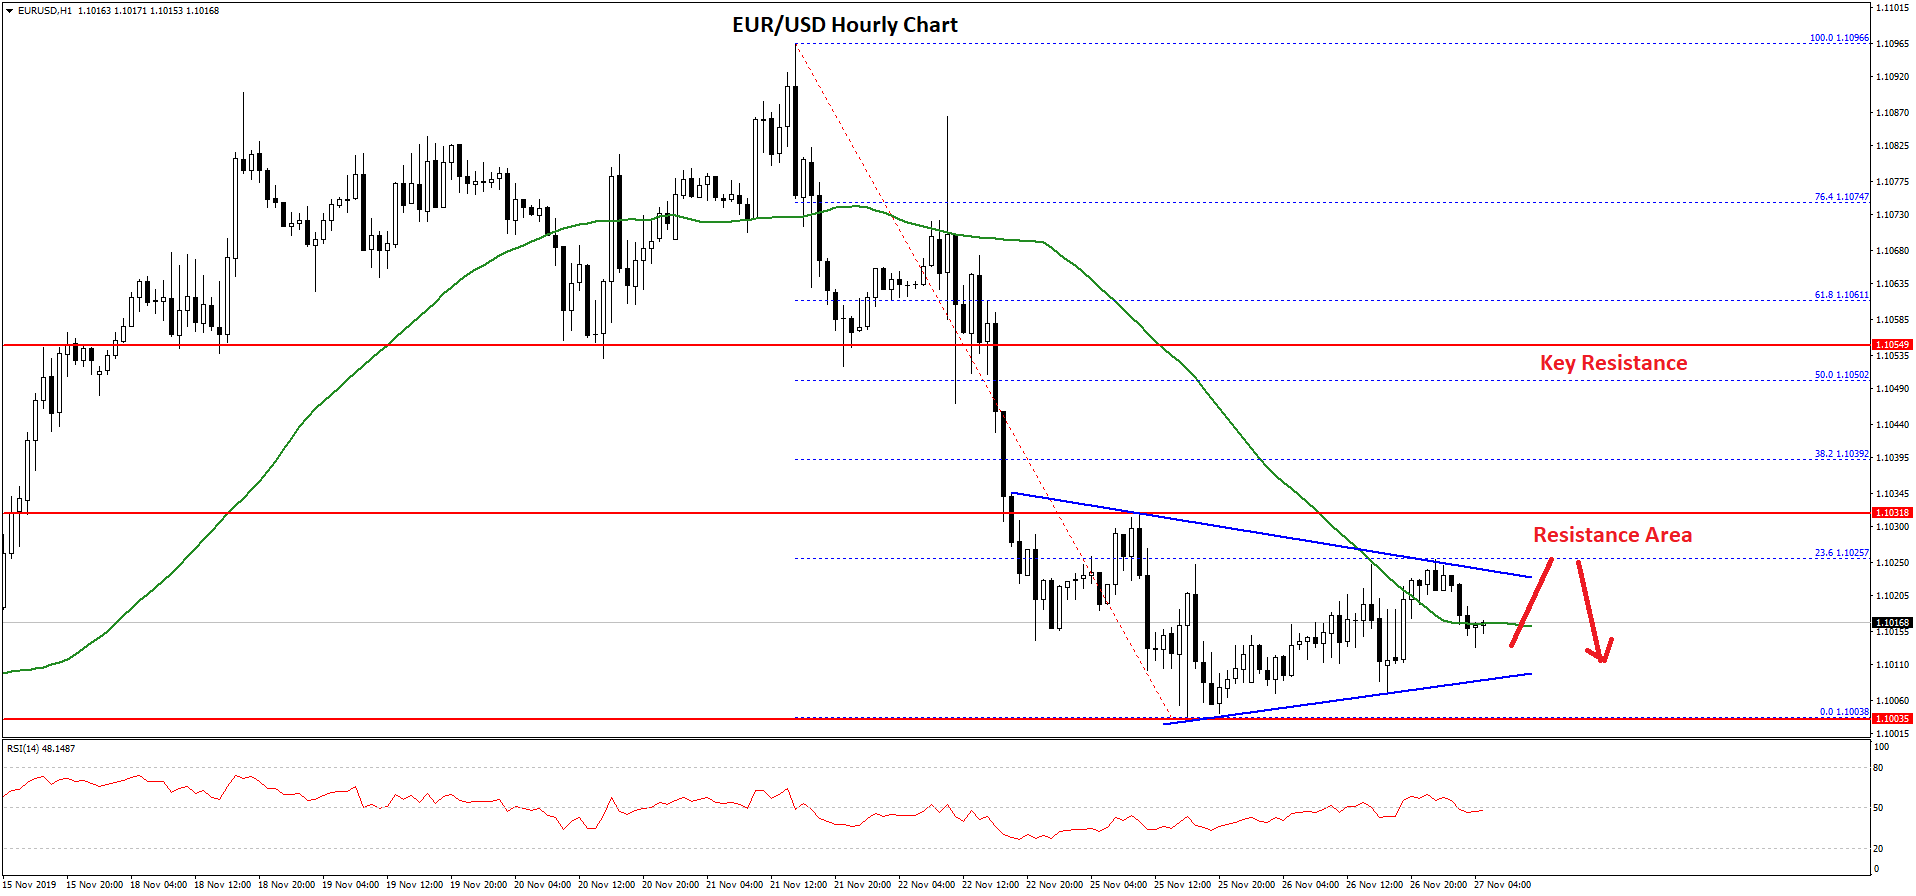 EUR/USD Could Extend Decline While USD/CHF Is Rising